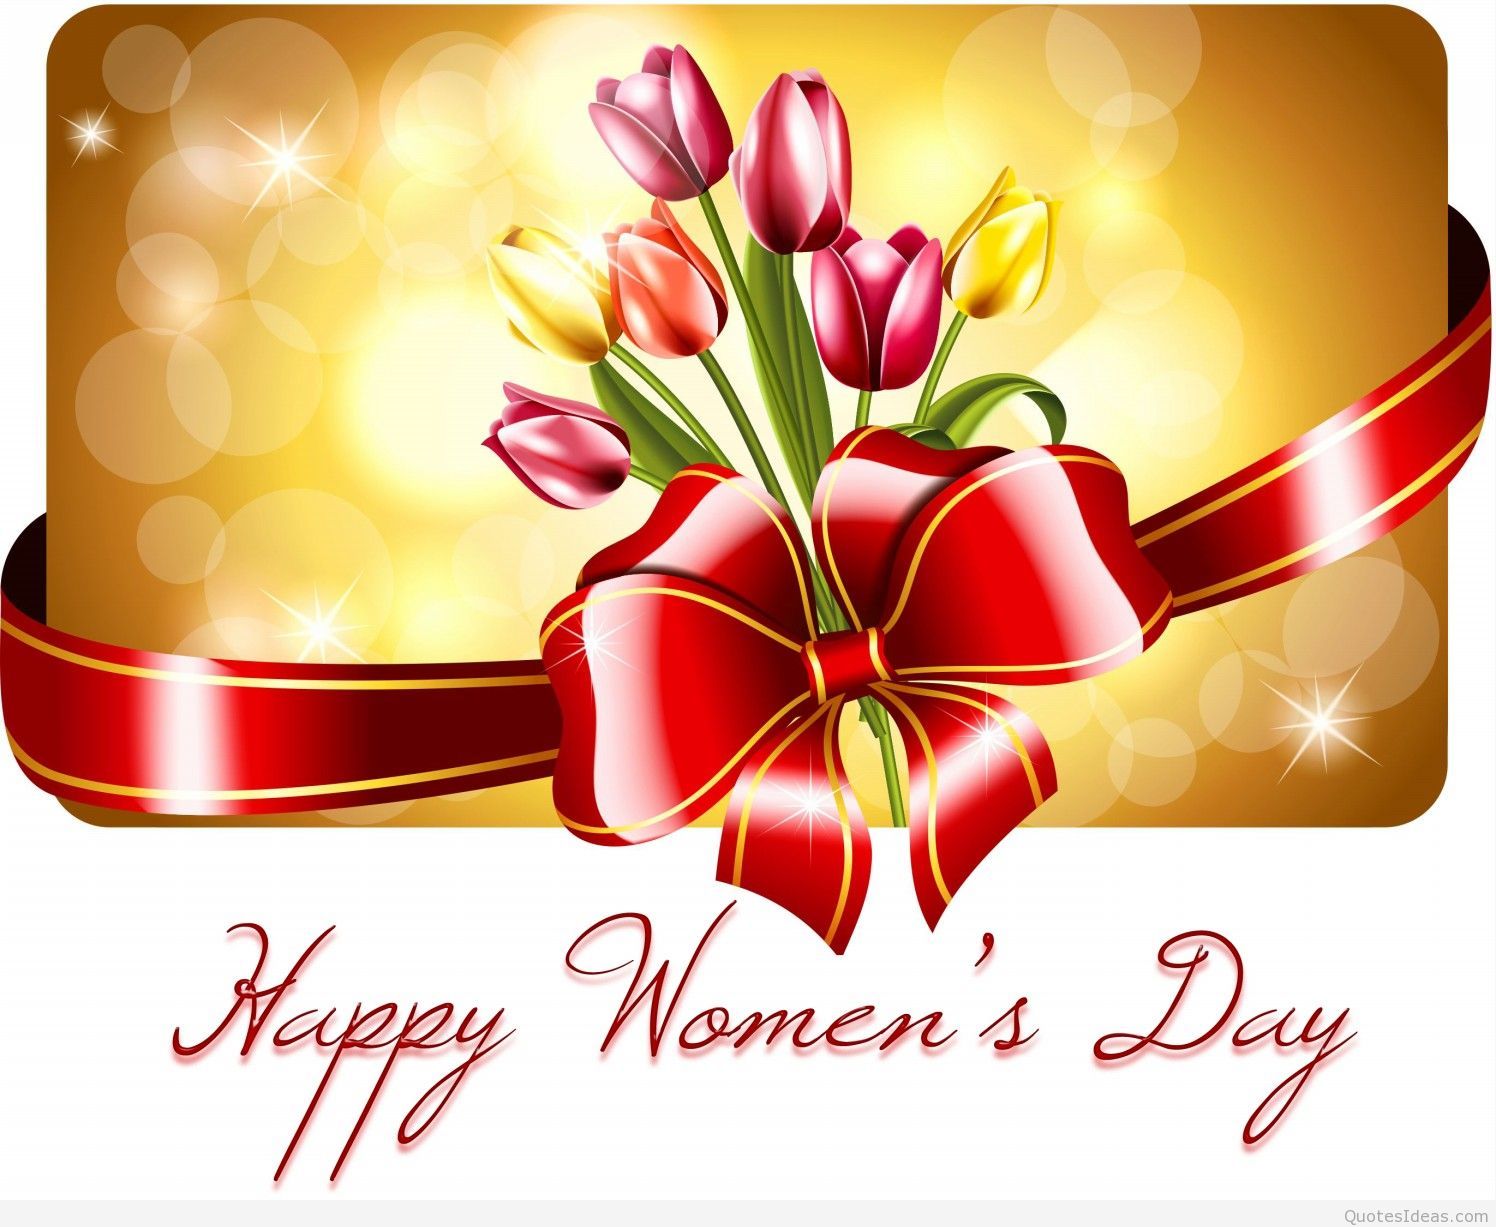 Happy women's day 8 march quotes and sayings